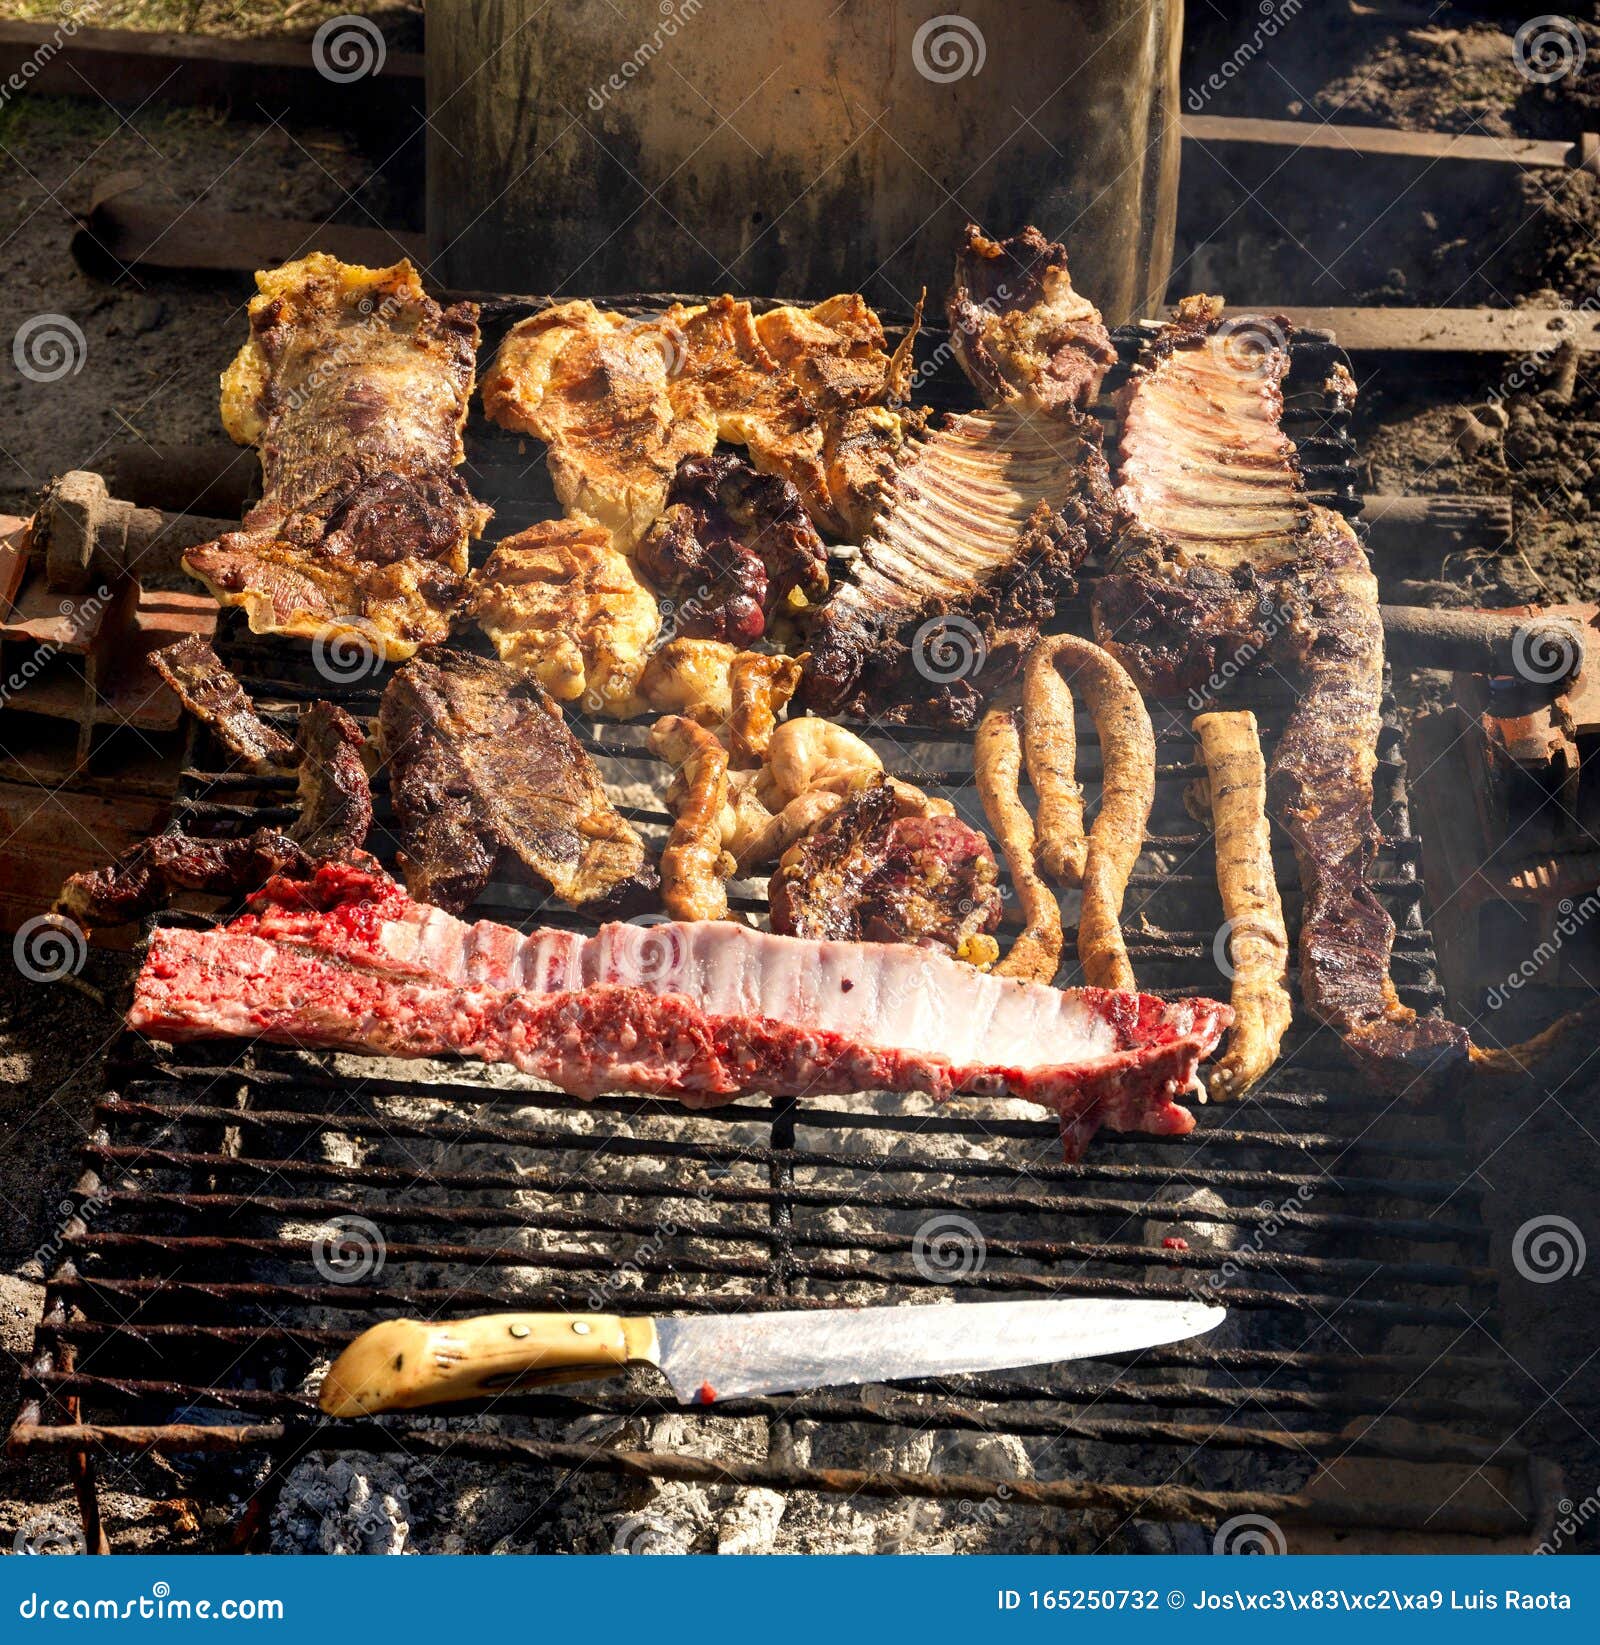 asado are the techniques and the social event of having